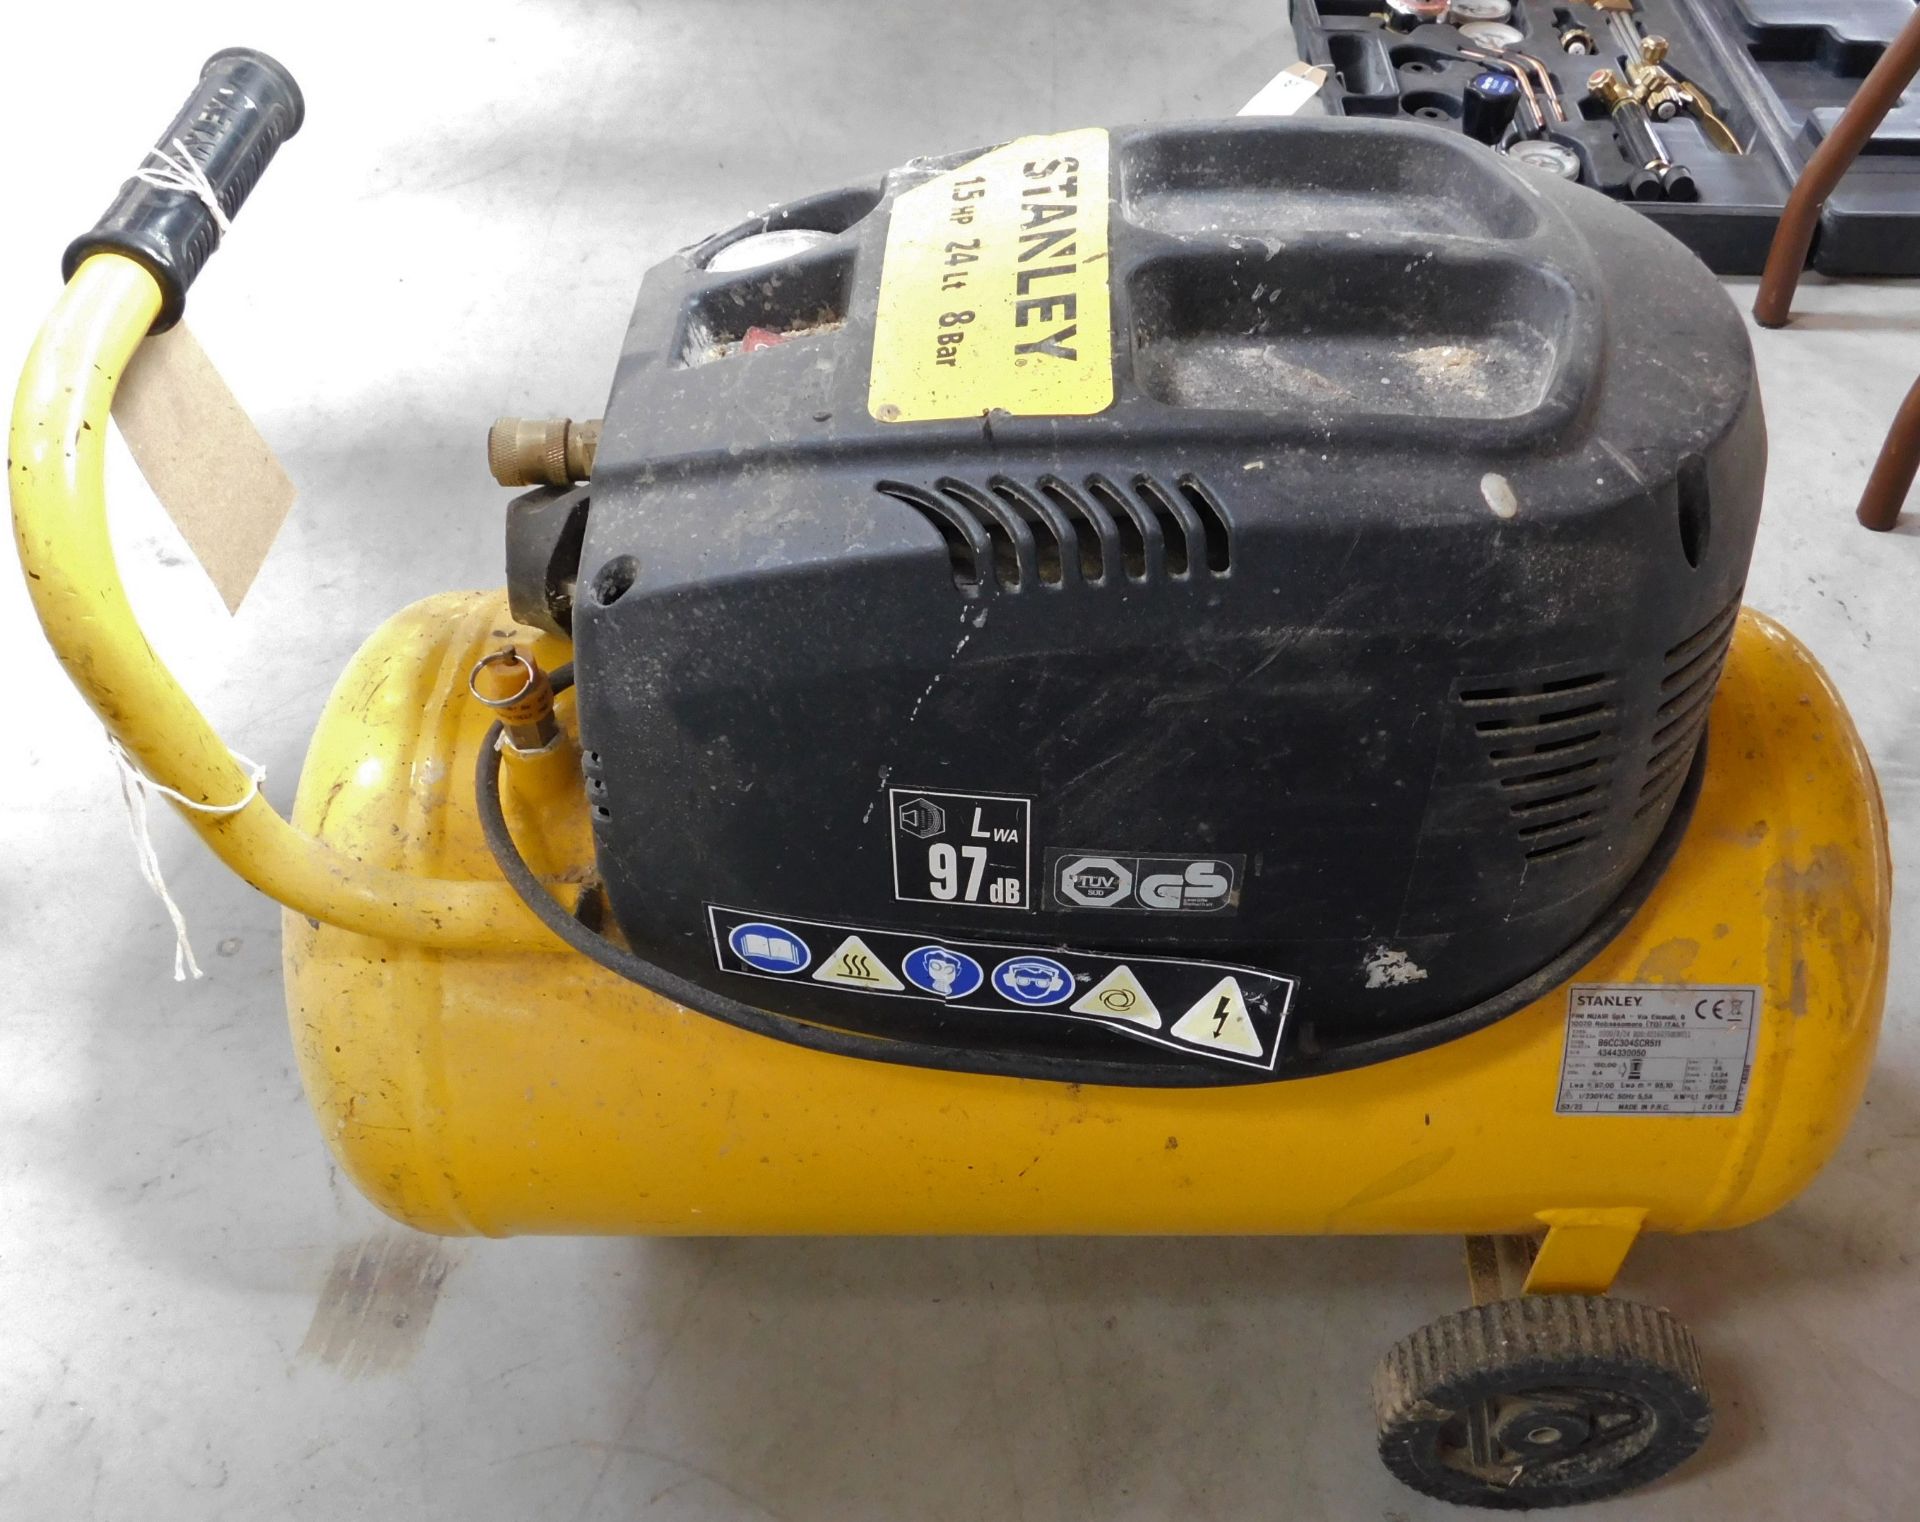 Stanley D200/8/24 Portable Compressor, Serial Number 4344330050 (Location: Brentwood. Please Refer - Image 2 of 3